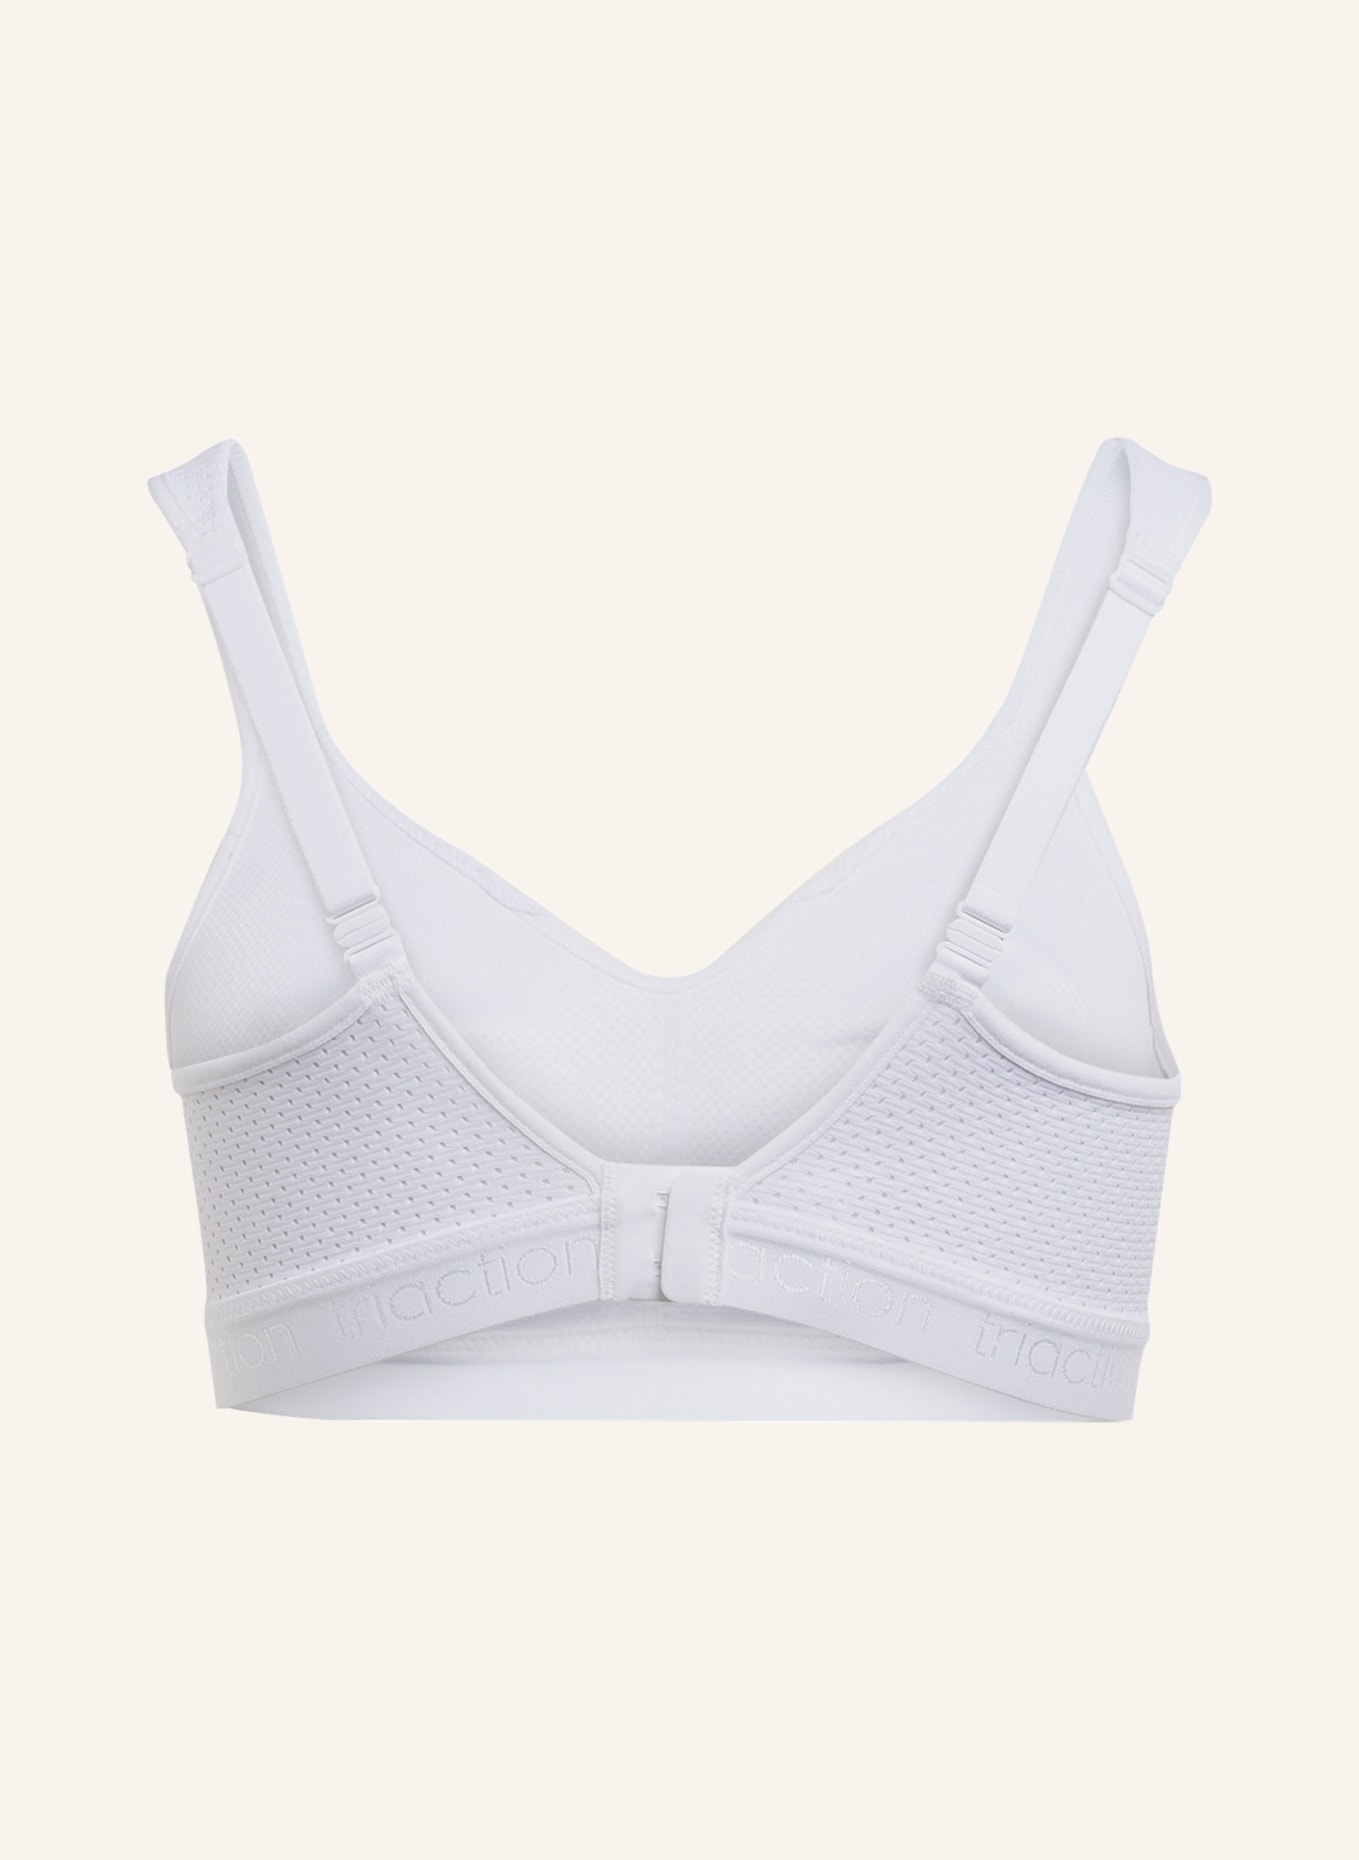 Triumph Sports bra TRIACTION ENERGY LITE with mesh, Color: WHITE (Image 2)